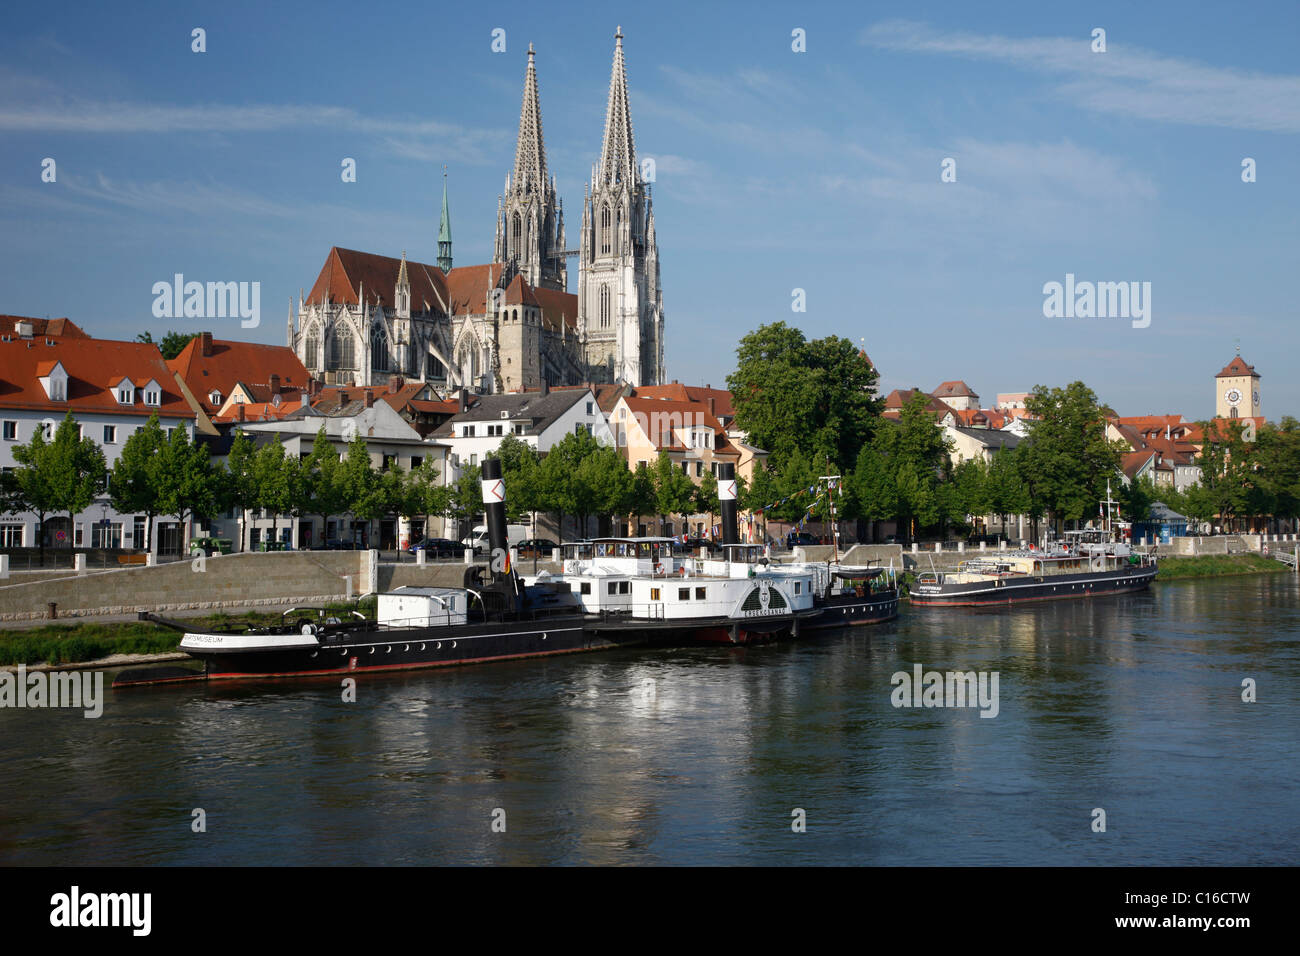 Cathedral and museum ship, Regensburg, UNESCO World Heritage Site, Danube River, Upper Palatinate, Bavaria, Germany, Europe Stock Photo